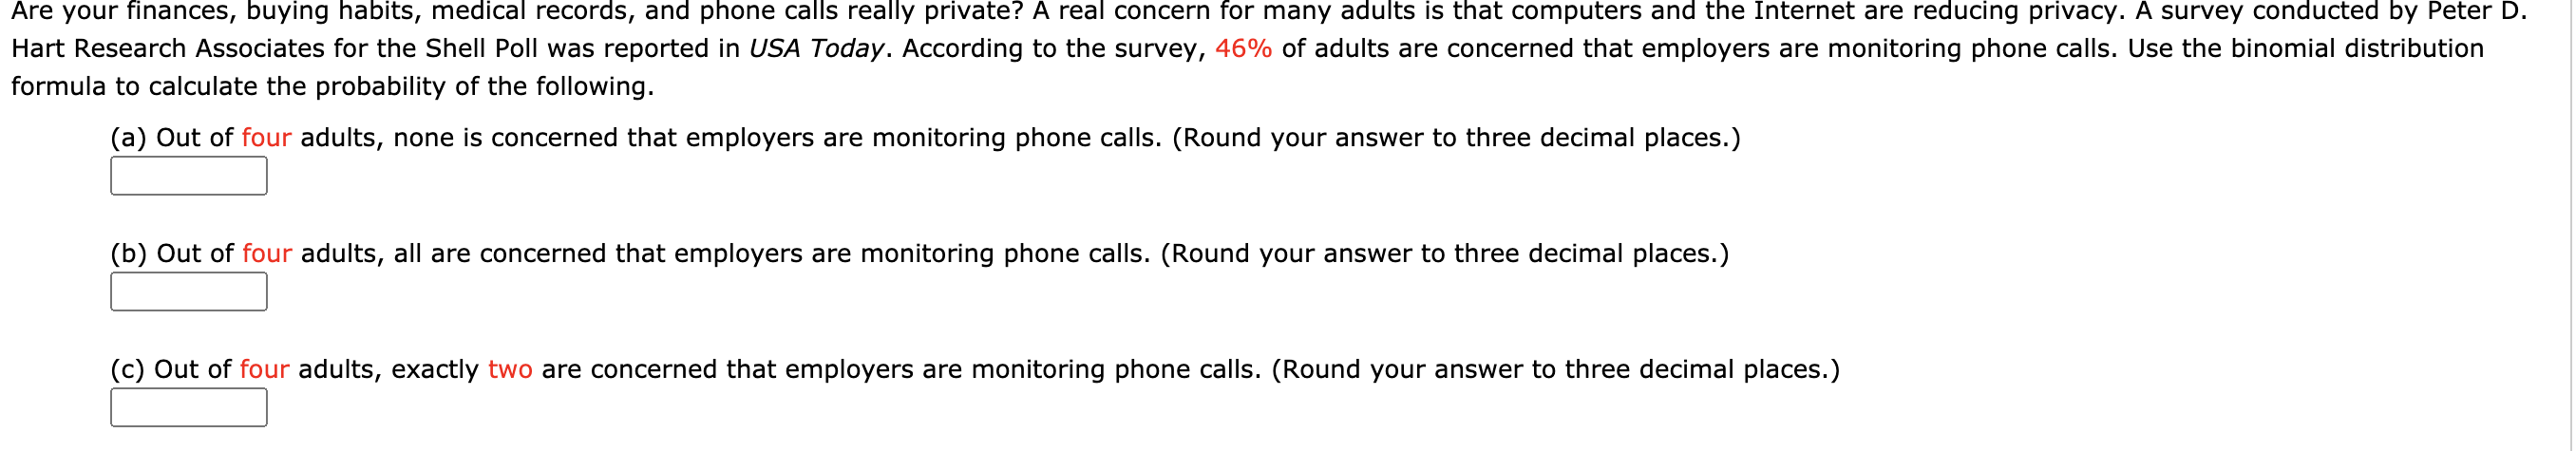 (a) Out of four adults, none is concerned that employers are monitoring phone calls. (Round your answer to three decimal places.)
(b) Out of four adults, all are concerned that employers are monitoring phone calls. (Round your answer to three decimal places.)
(c) Out of four adults, exactly two are concerned that employers are monitoring phone calls. (Round your answer to three decimal places.)
